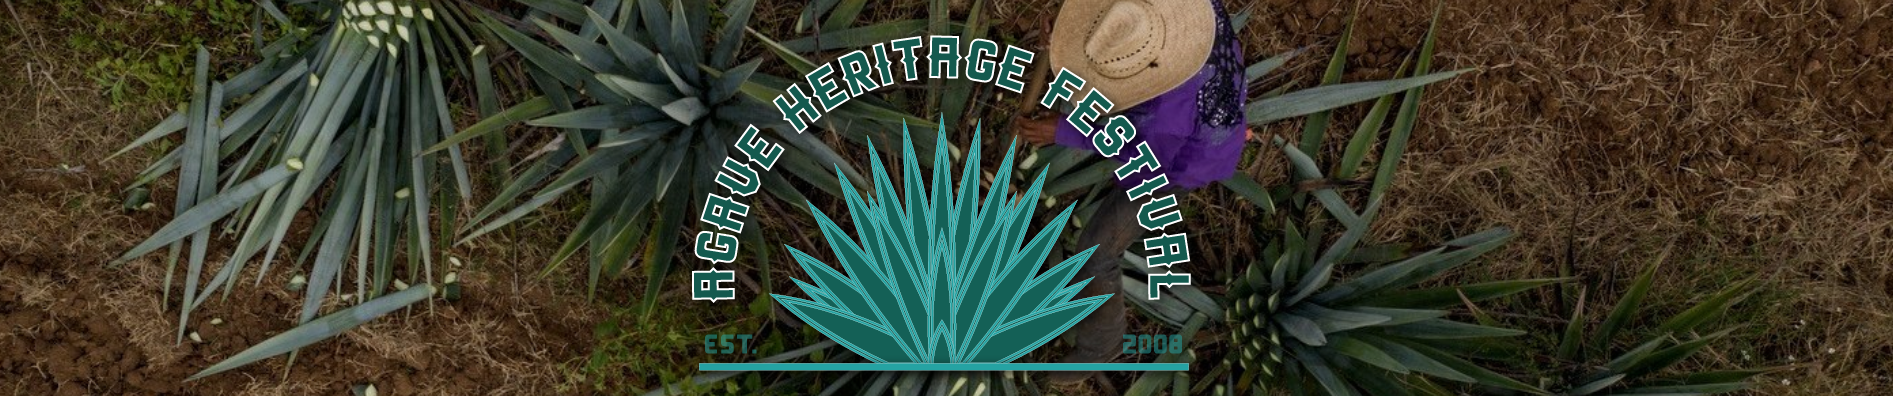 Agave drawing and logo of Agave Heritage Festival Tucson 2024